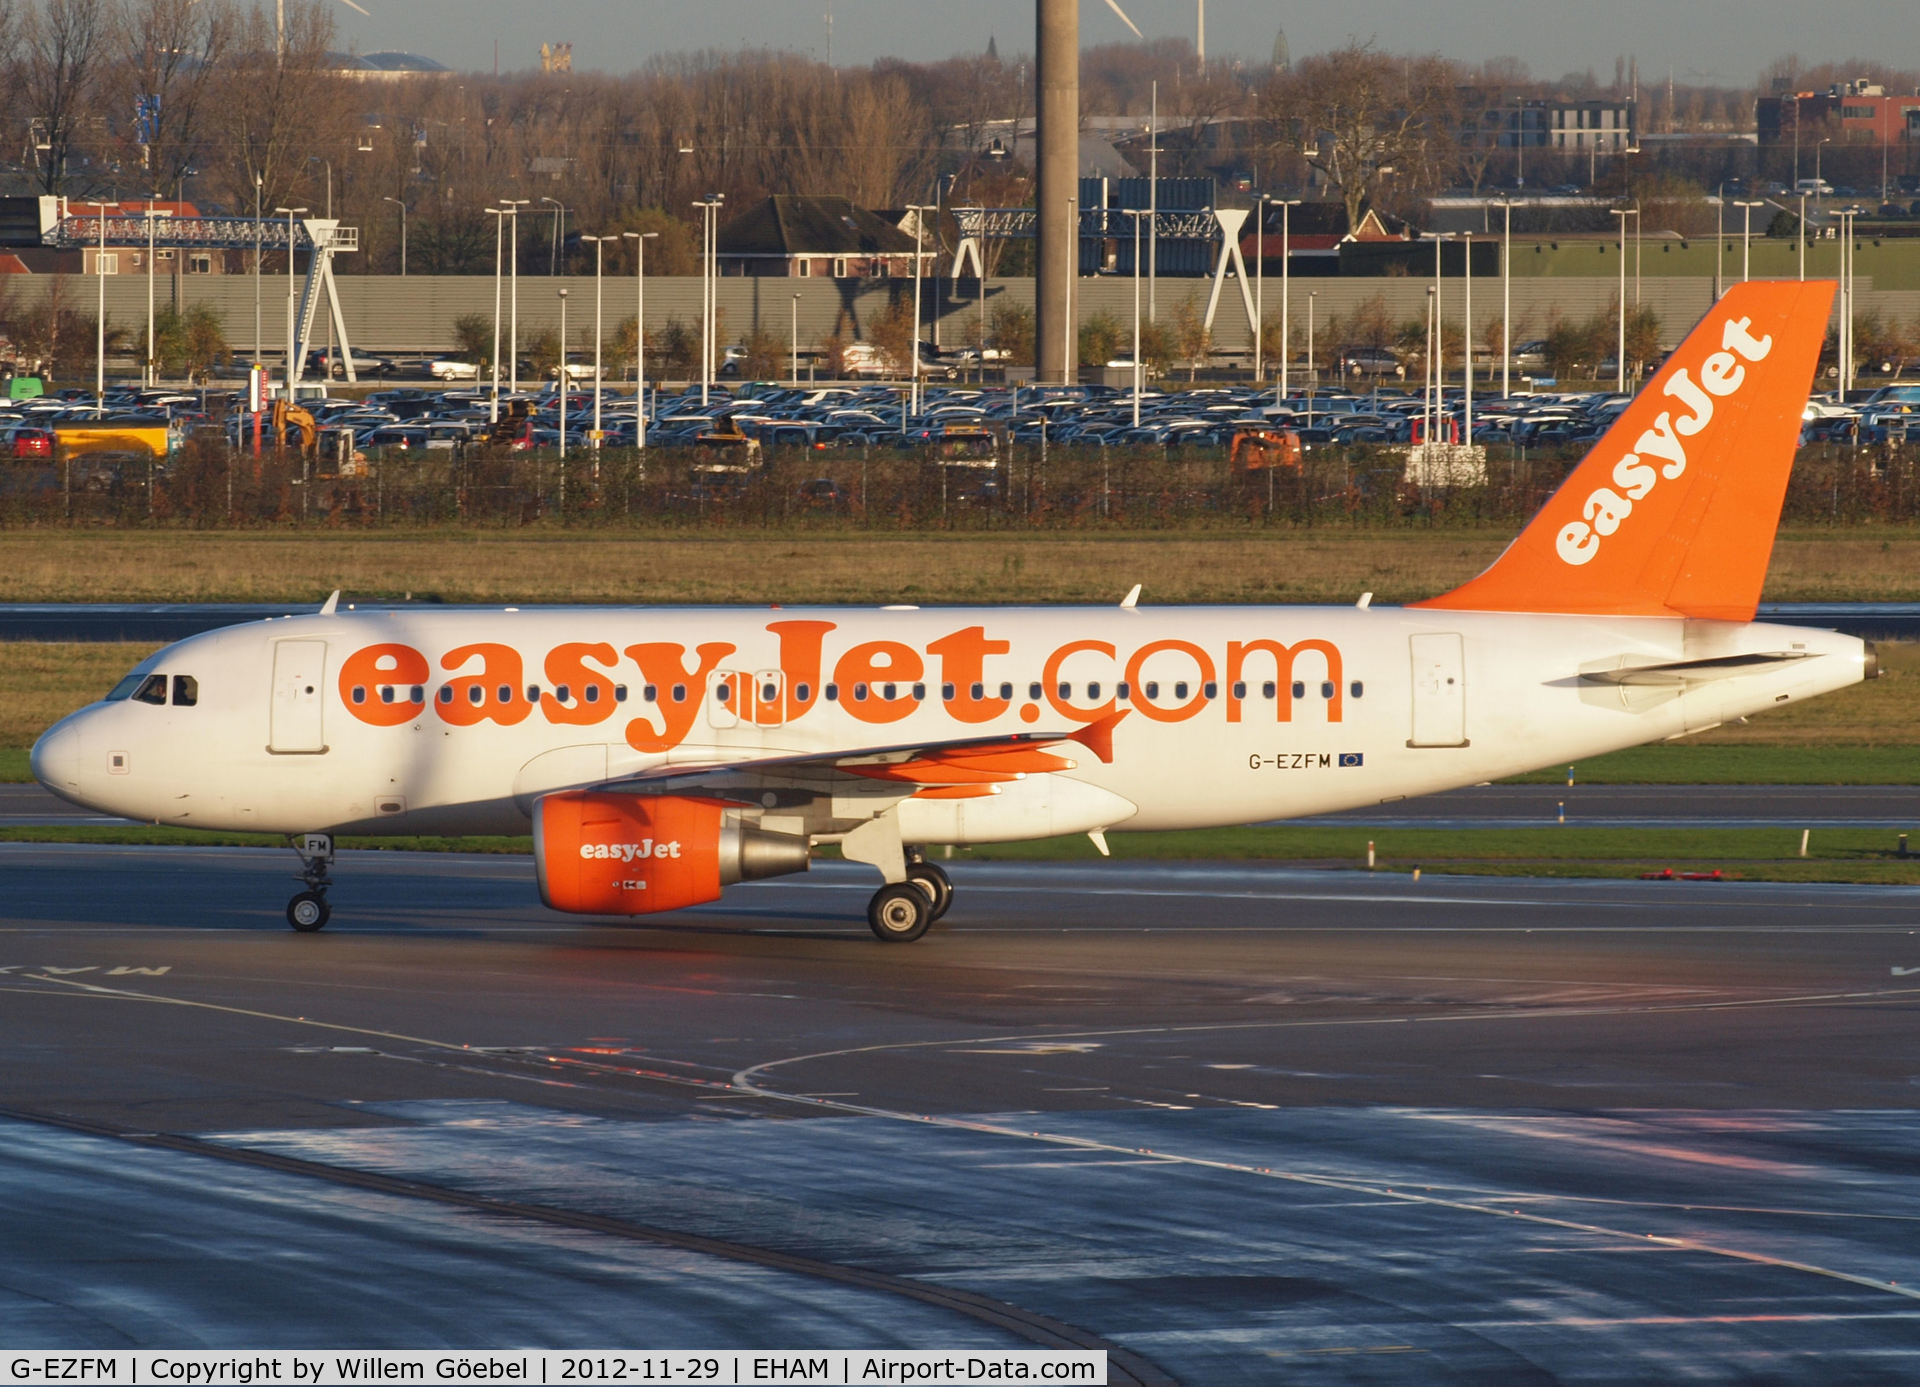 G-EZFM, 2009 Airbus A319-111 C/N 4069, Taxi to the gate of Schiphol Airport